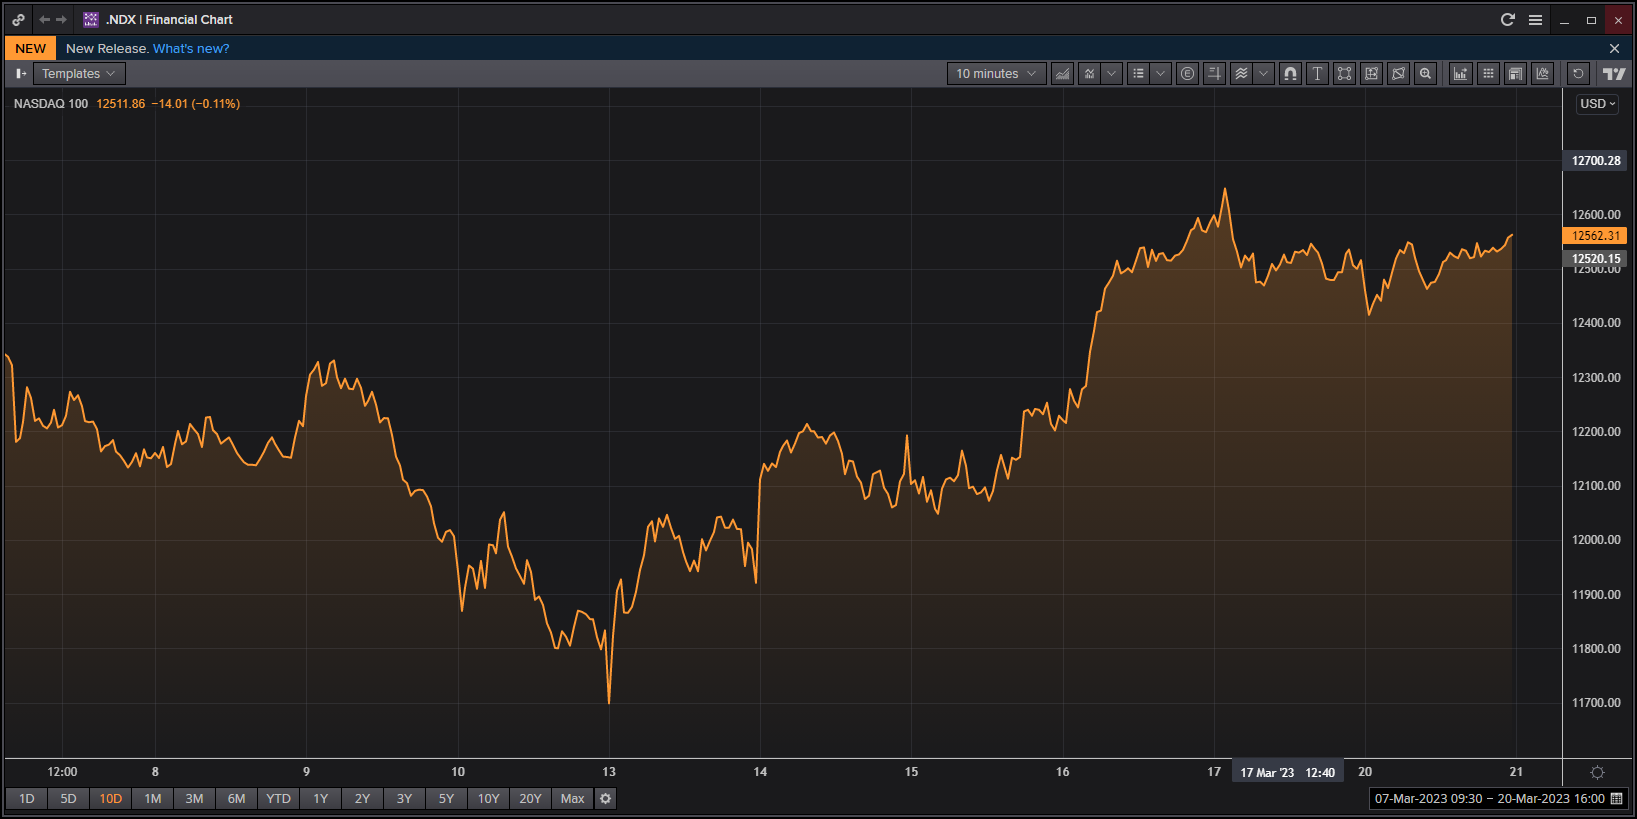 The Nasdaq 100 share index over the past 10 days